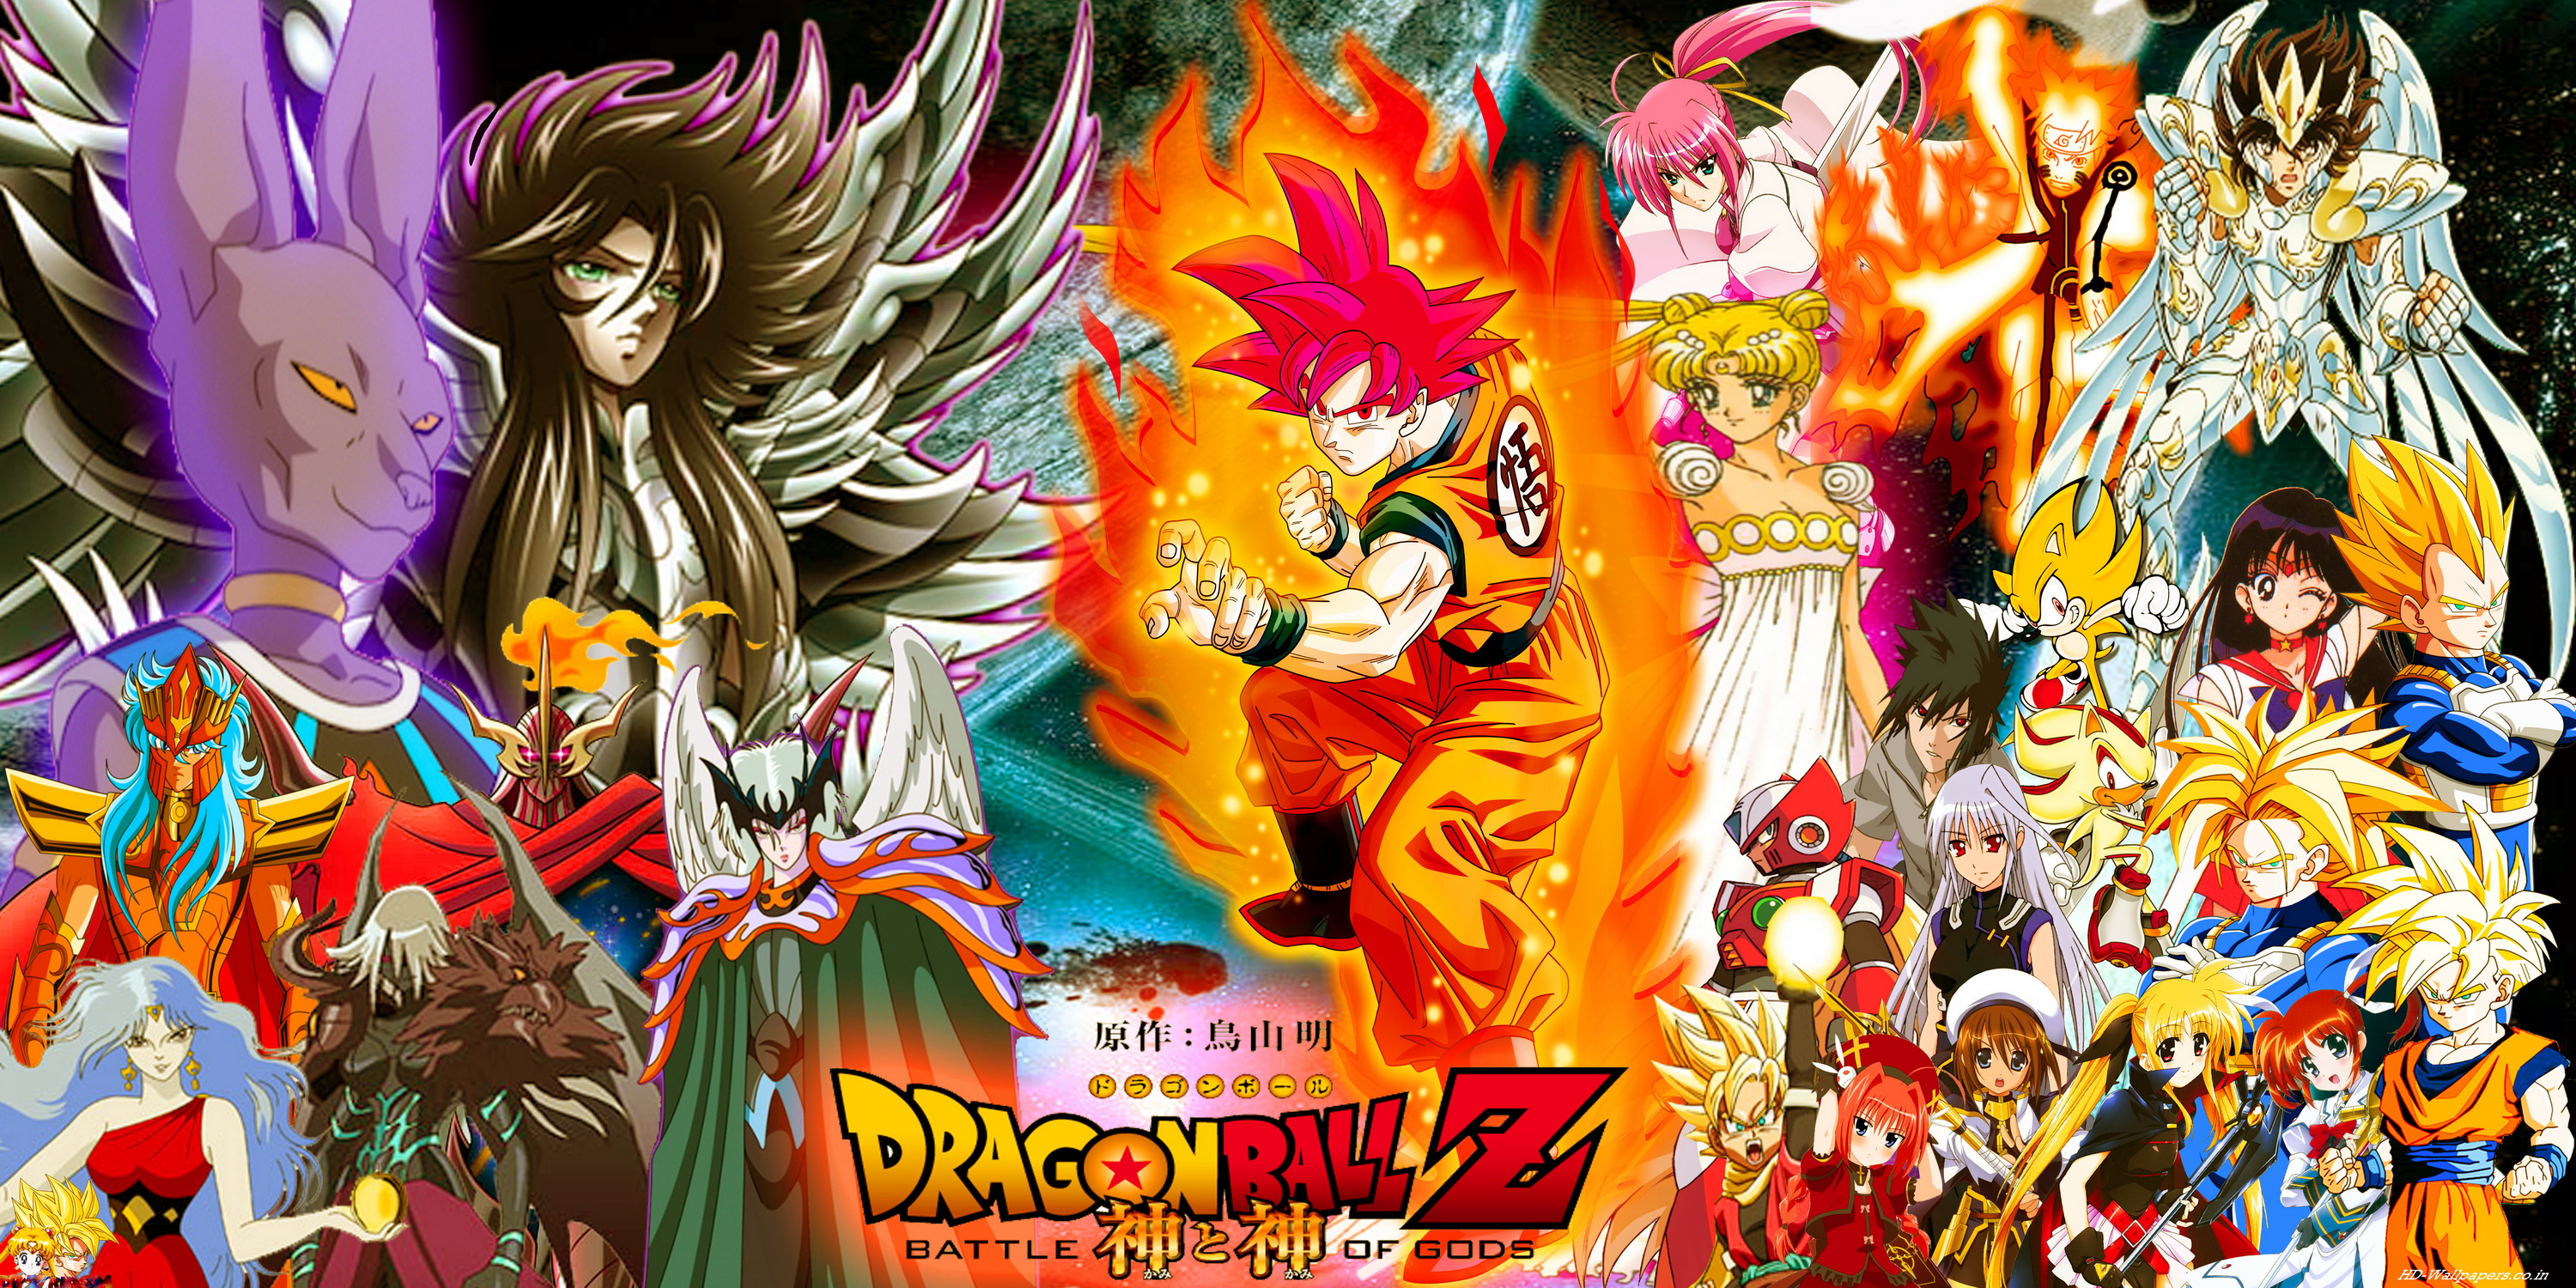 Free Download Dragon Ball Z Wallpapers Pictures Images 3000x1500 For Your Desktop Mobile Tablet Explore 75 Dragonball Z Wallpaper Dragon Ball Super Wallpaper Dbz Background Wallpapers Cool Dragon Ball Z Wallpapers